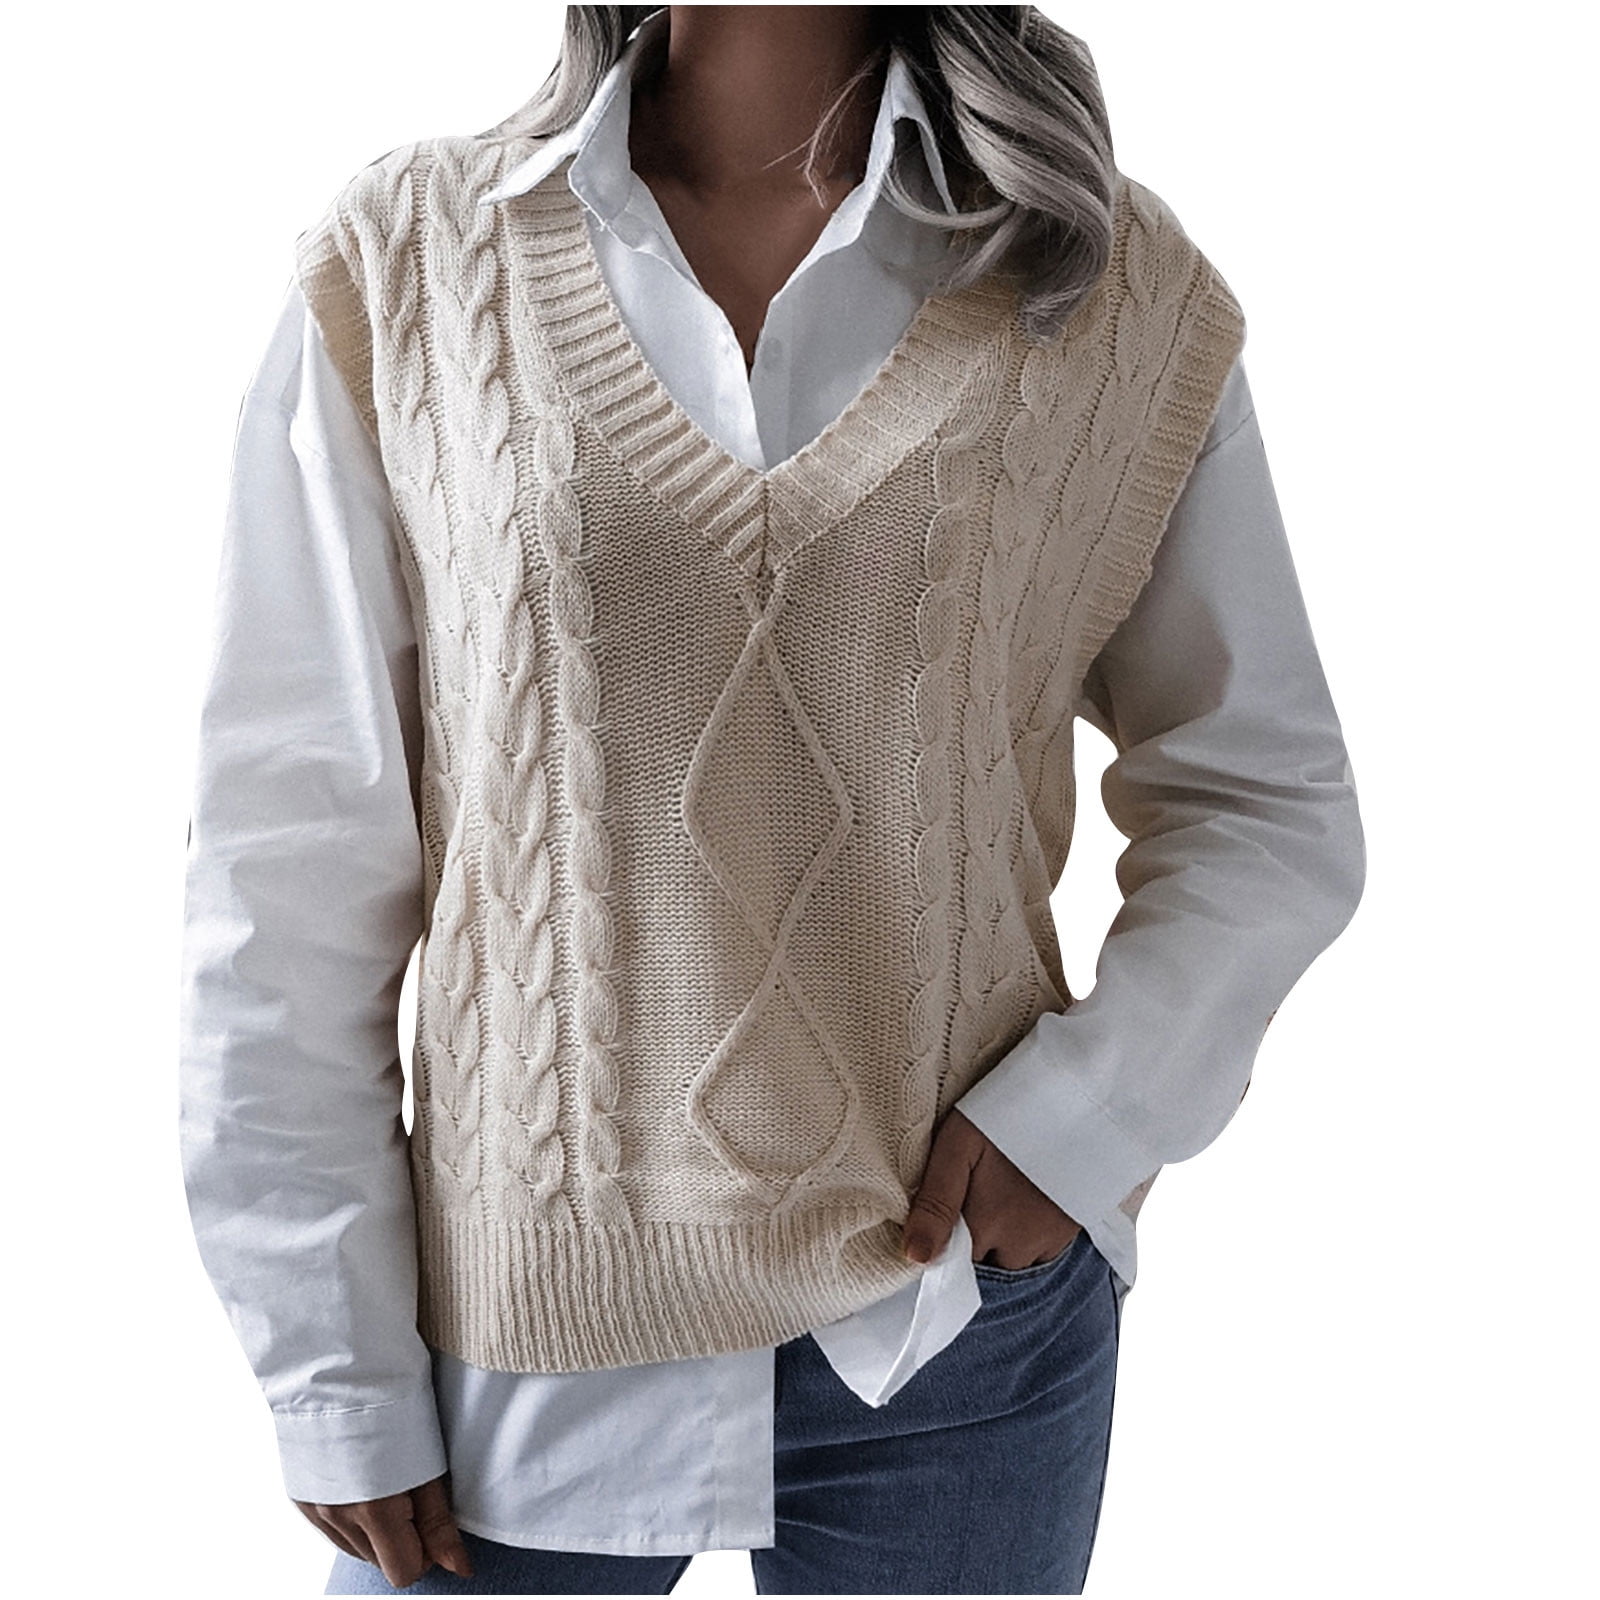 Taqqpue Womens V-Neck Cable Knit Sweater Vest Plus Size Solid Color Loose Tunic Pullover Knitwear Tops Oversized Womens Sweater Vest Tops,Christmas Gifts Women -